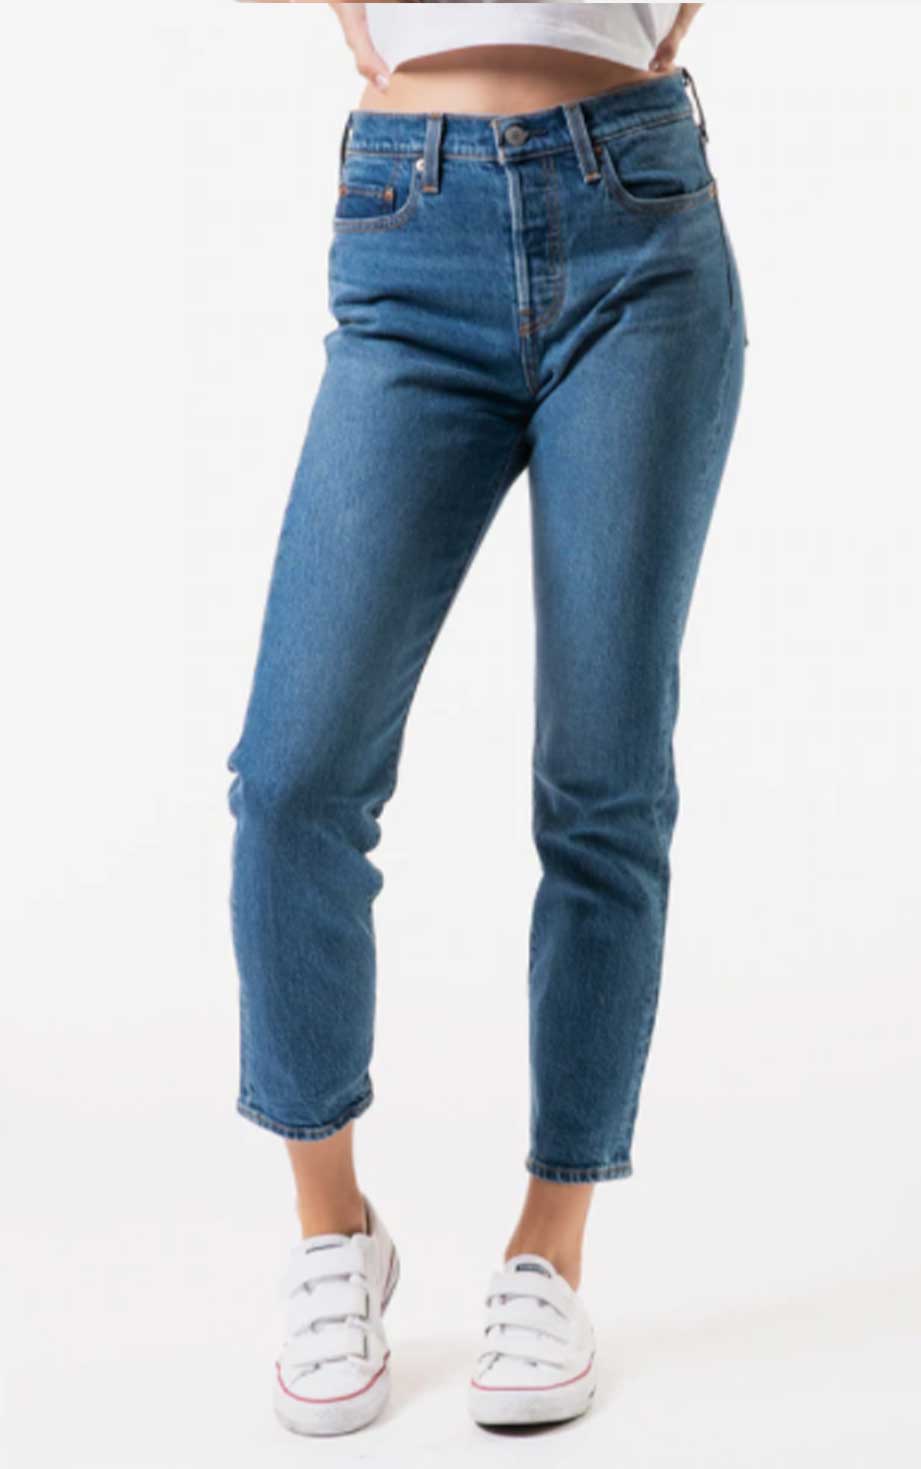 Levi's - Wedgie Fit Ankle Jeans | Charleston Moves | Women's Jeans Montreal – Le